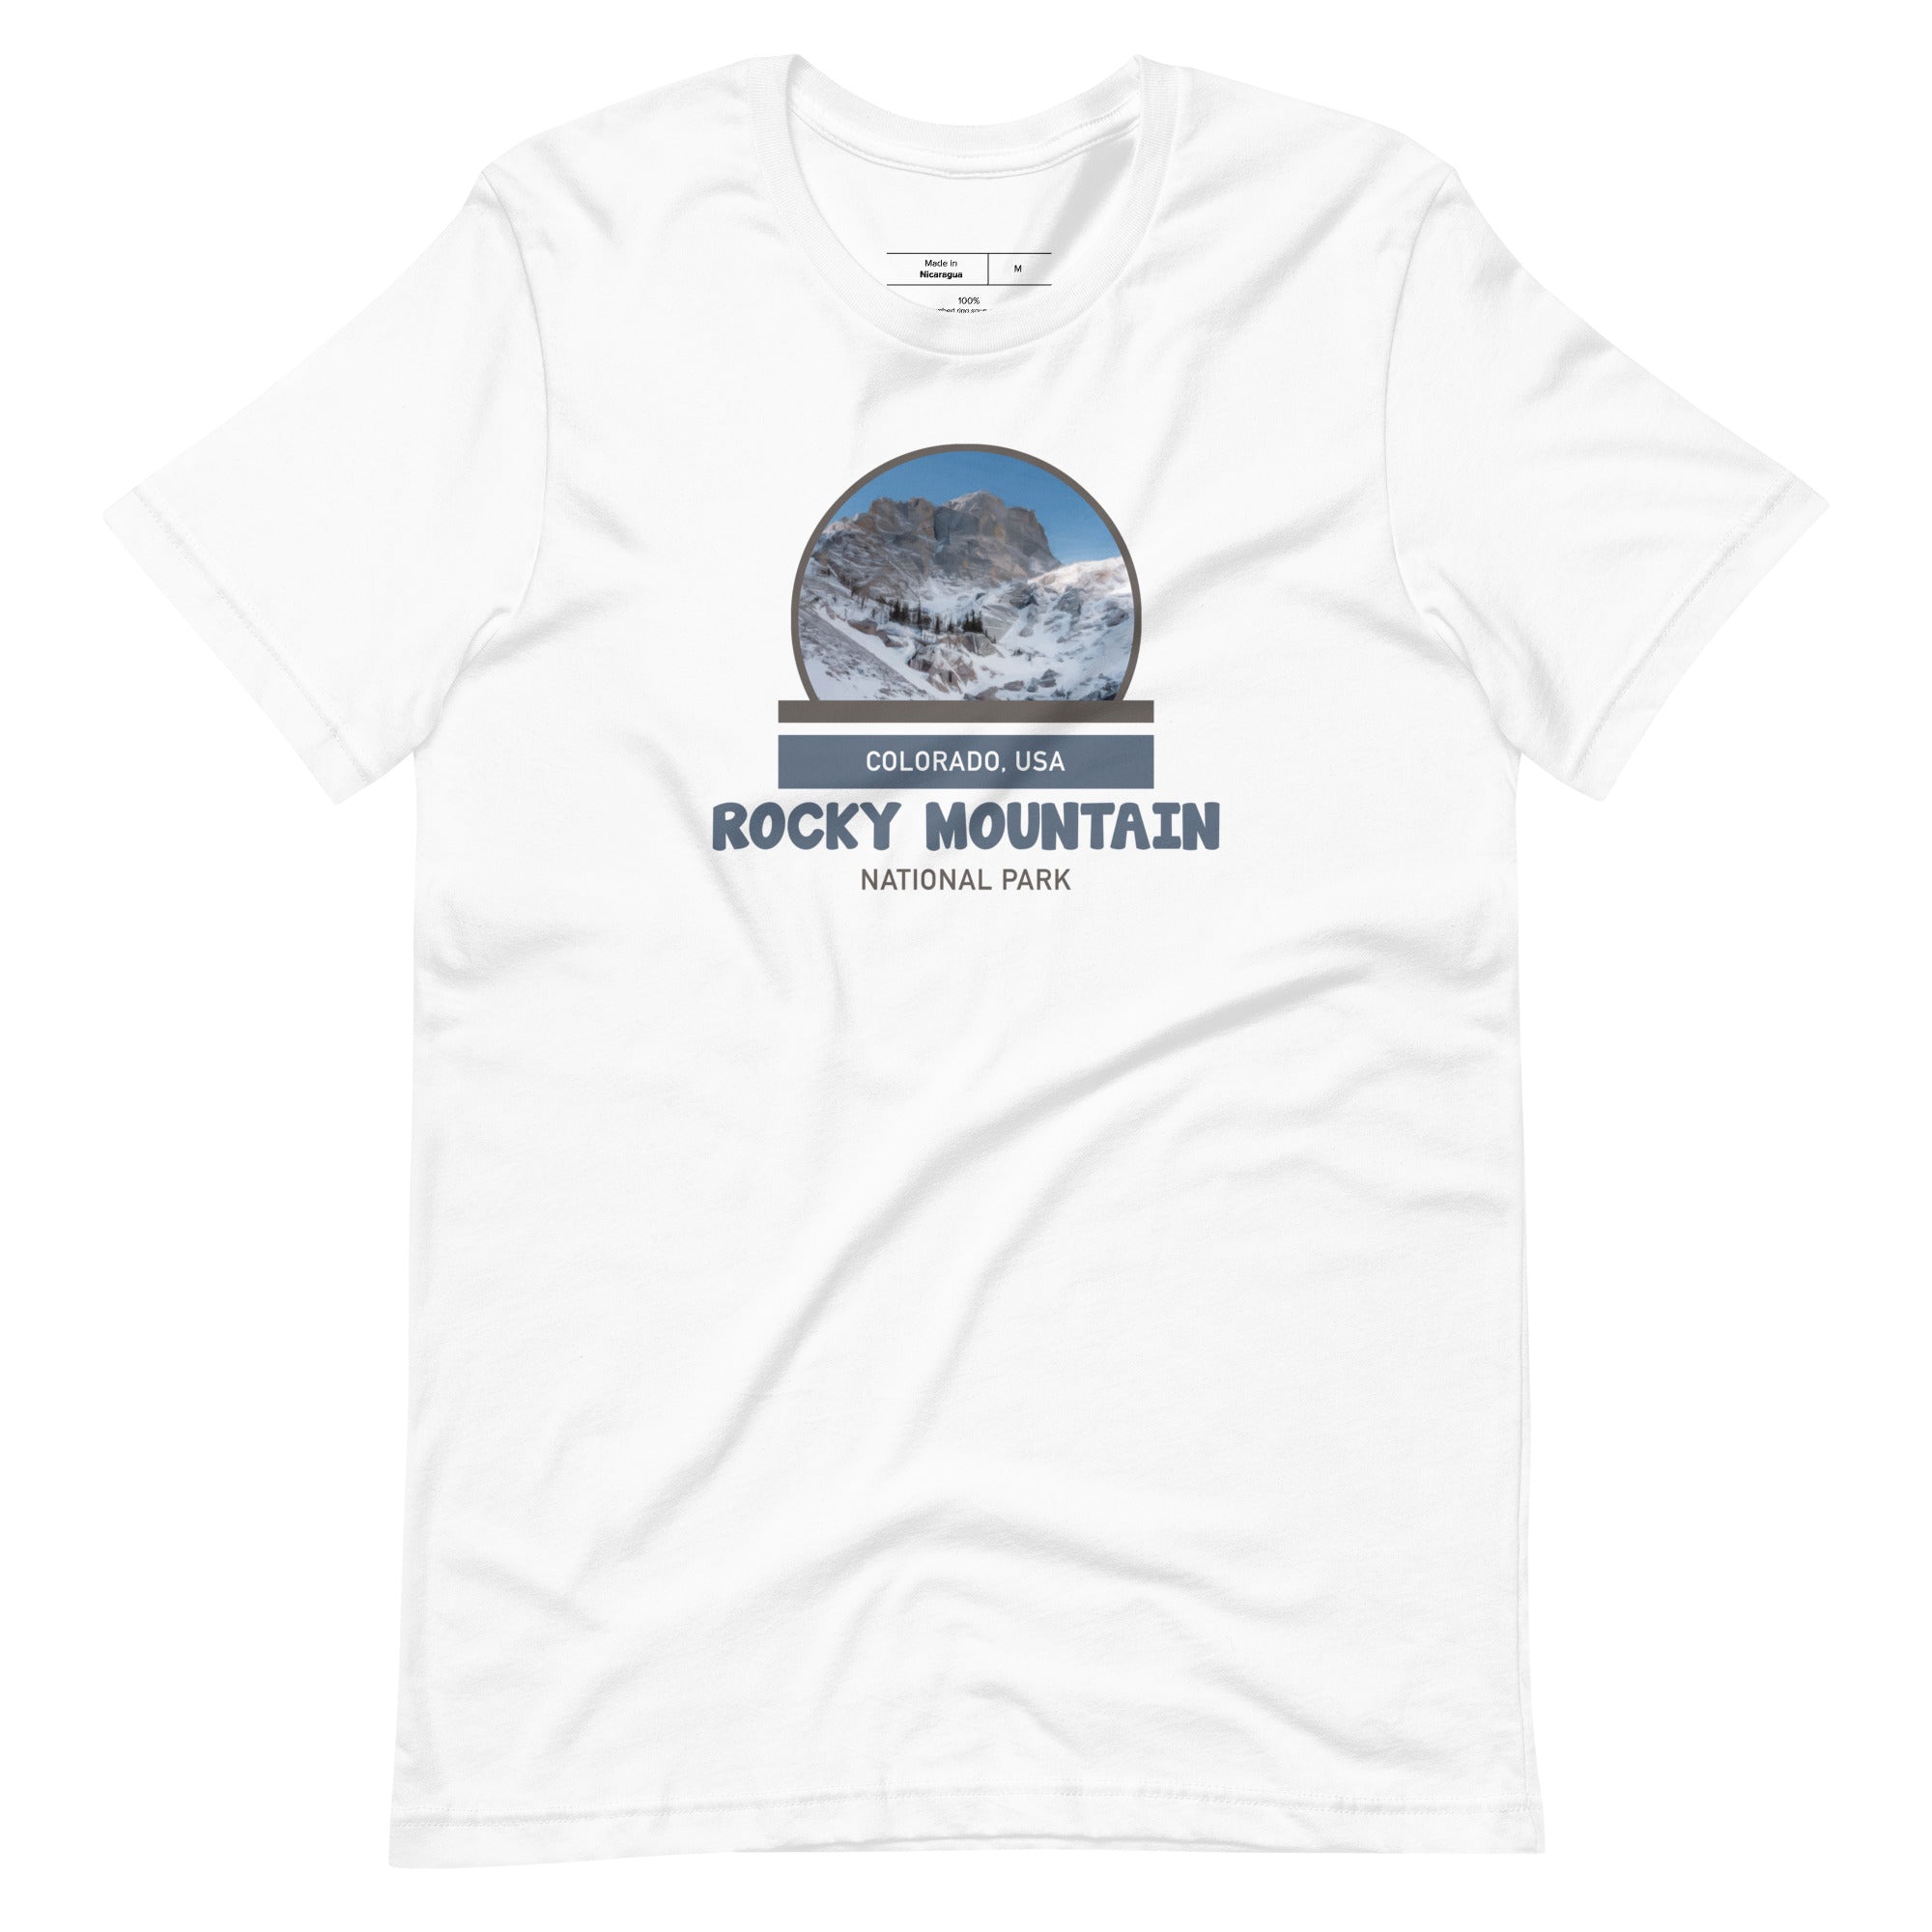 Rocky Mountain “Rep The State” Shirt - Rocky Mountain National Park Shirt